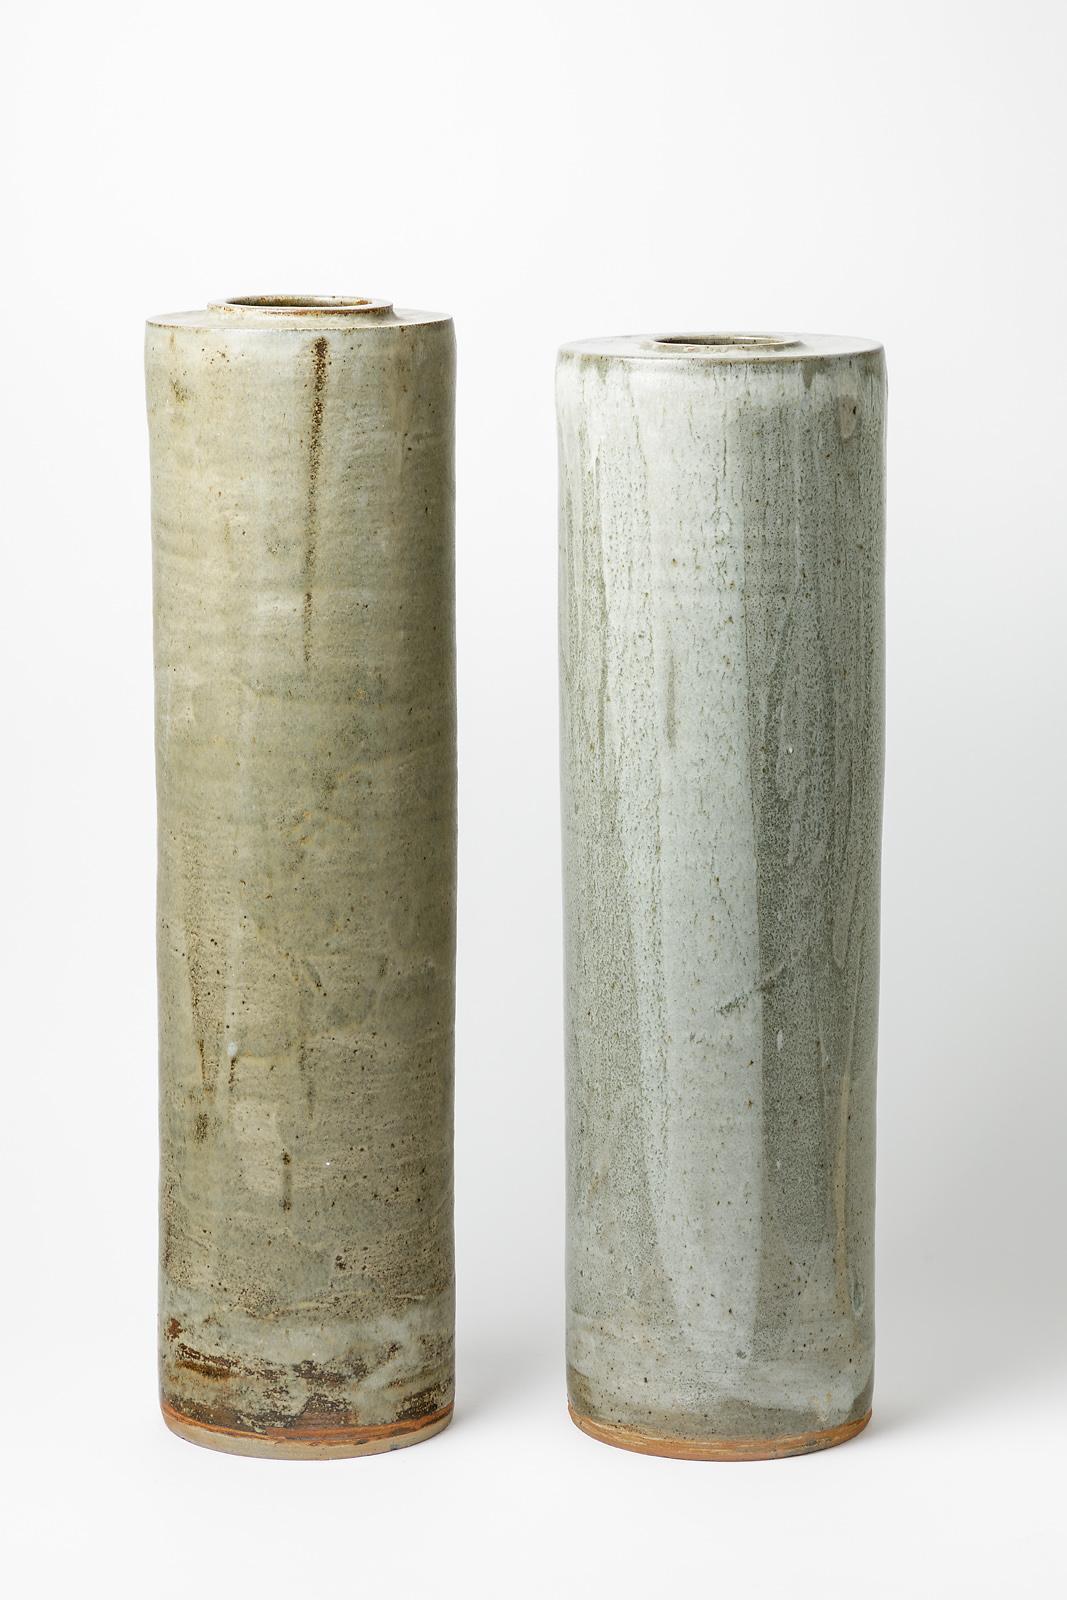 A pair of ceramic vases with grey, beige, white glazes decoration by Robert Heraud.
One vase is more small.
Perfect original conditions.
Signed under the base.
Circa 1980.
Unique piece.
Dimensions :
- 63 cm x 17 cm / 25' x 6' 7 inches.
- 60